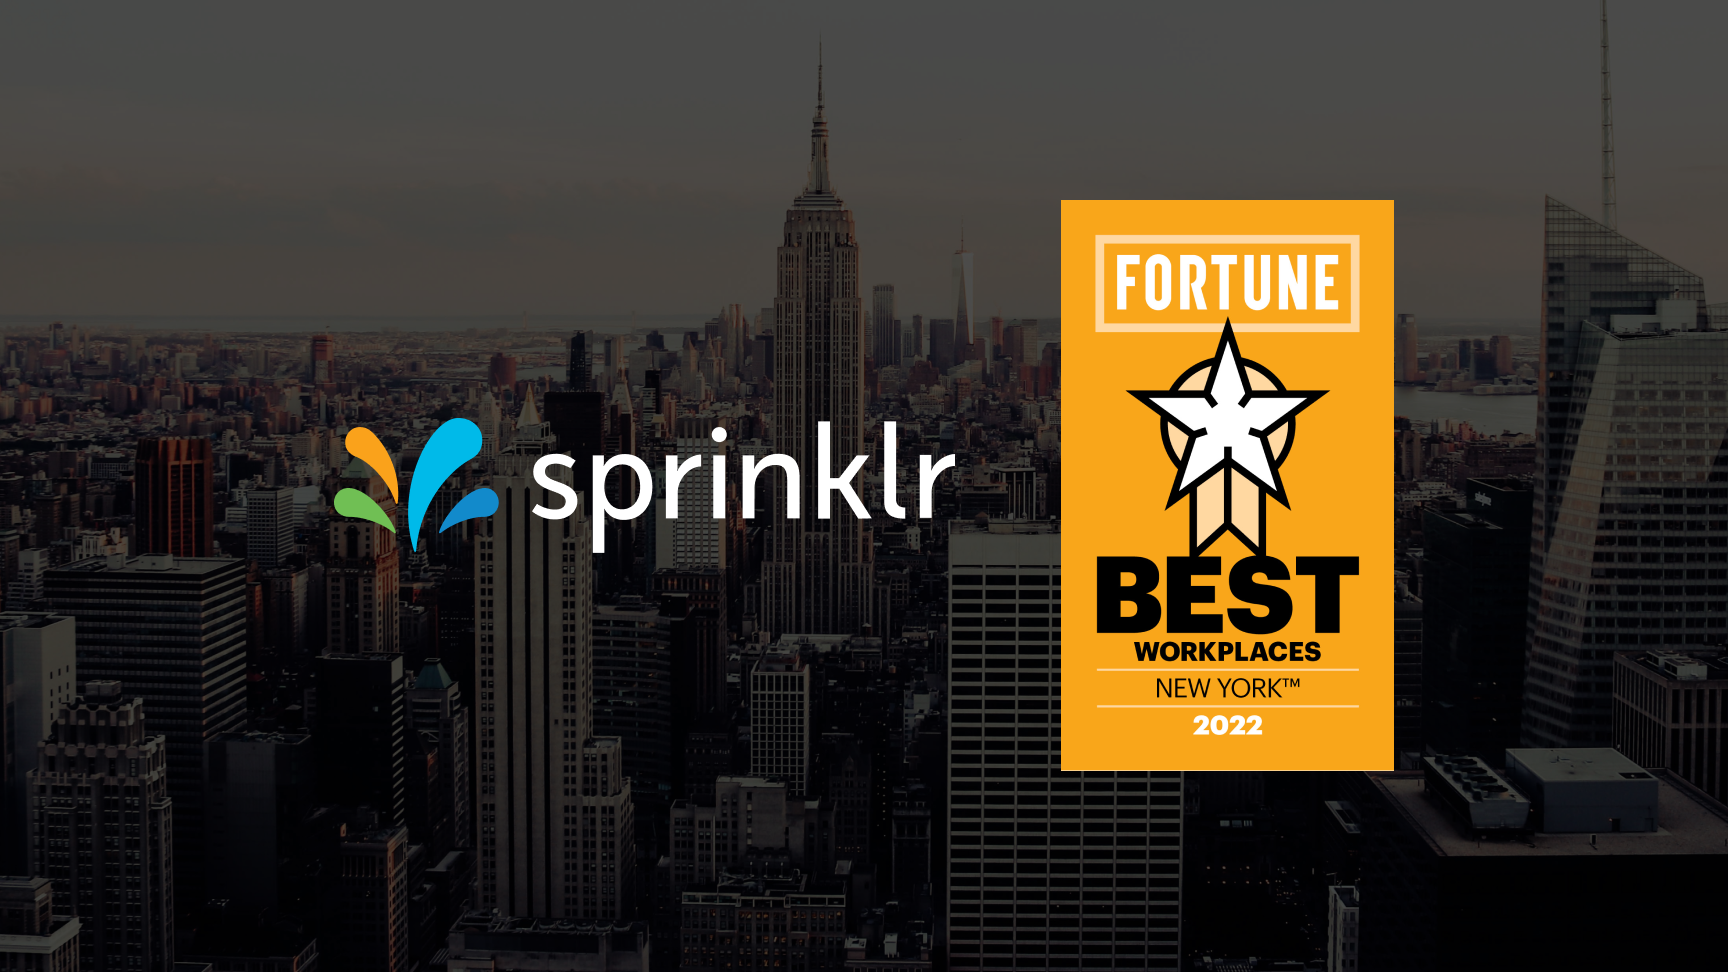 Sprinklr named to Fortune Magazine’s Best Workplaces in New York list for the second year in a row!